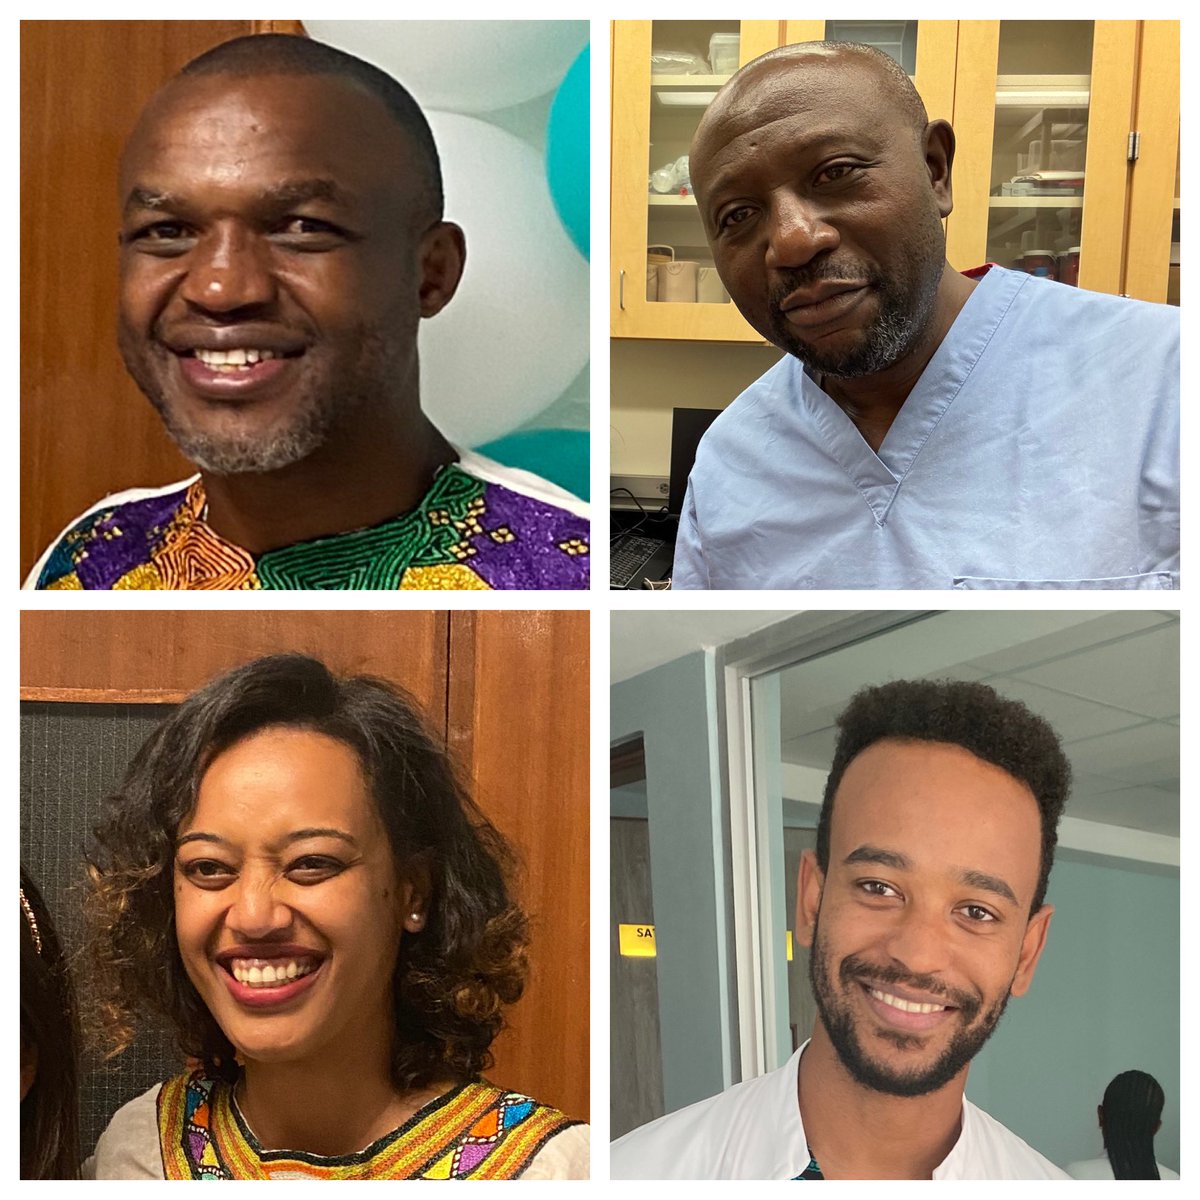 Rise & shine @APSASurgeons!! Sadly I can’t be there so PLEASE welcome these @KijabeHospital &/or @BethanyKids surgeons to the meeting for me!! Tweet a pic with them & you’ll get a personal invite to come work with us in Kenya!! ;) 🌍🇰🇪 @NgockGeorge @DesalegnMehret @md_muse